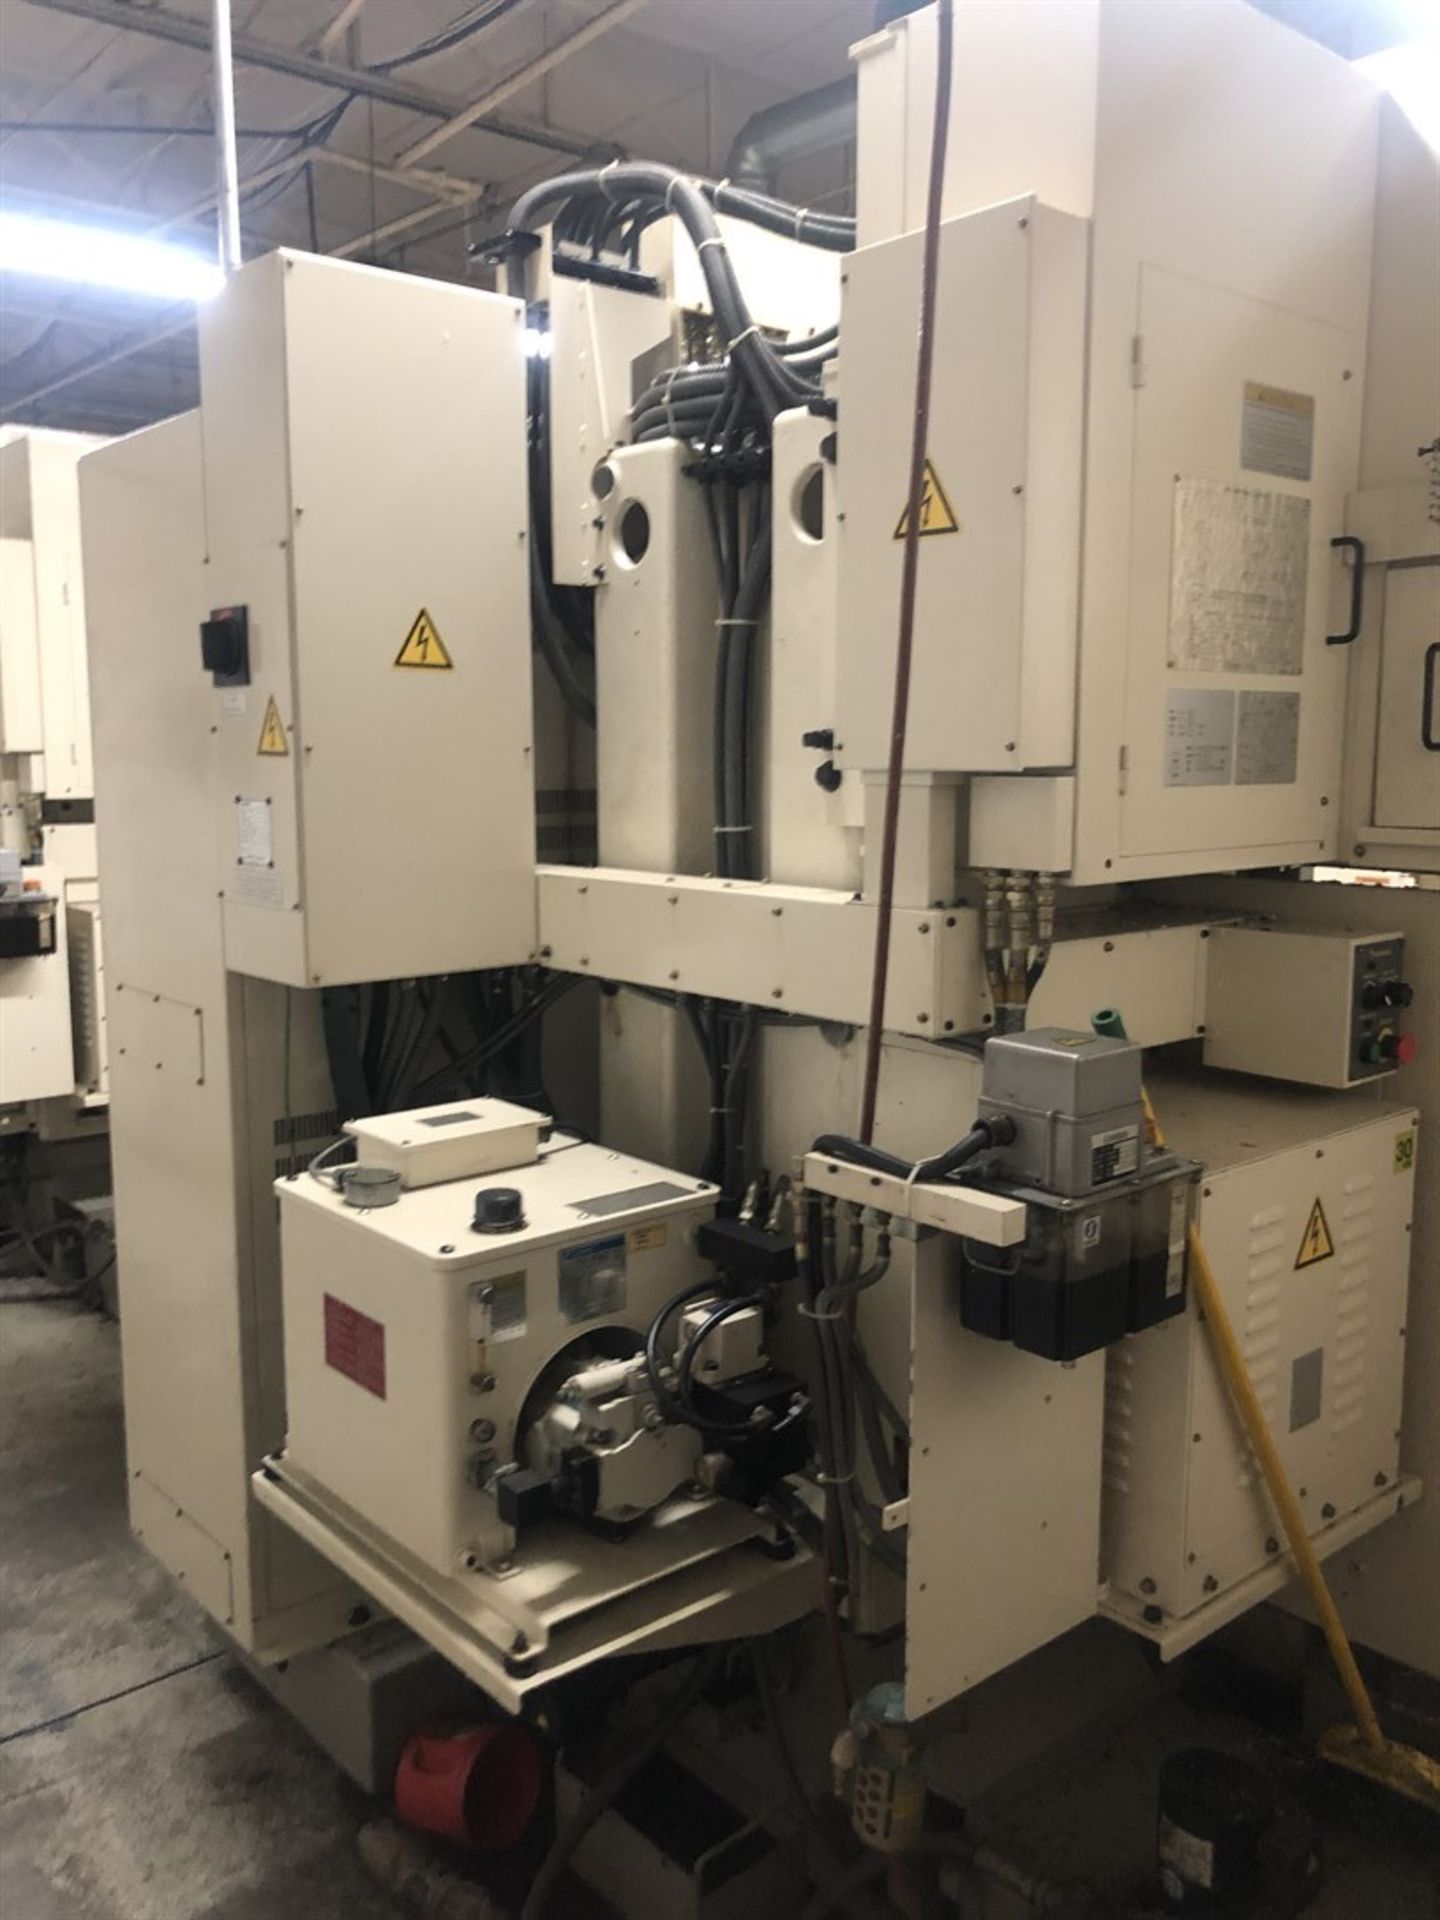 OKUMA MC-40VB Vertical Machining Center, s/n 0770, OSP 7000M Control, 17” x 39” Table, CT50 Spindle, - Image 4 of 10